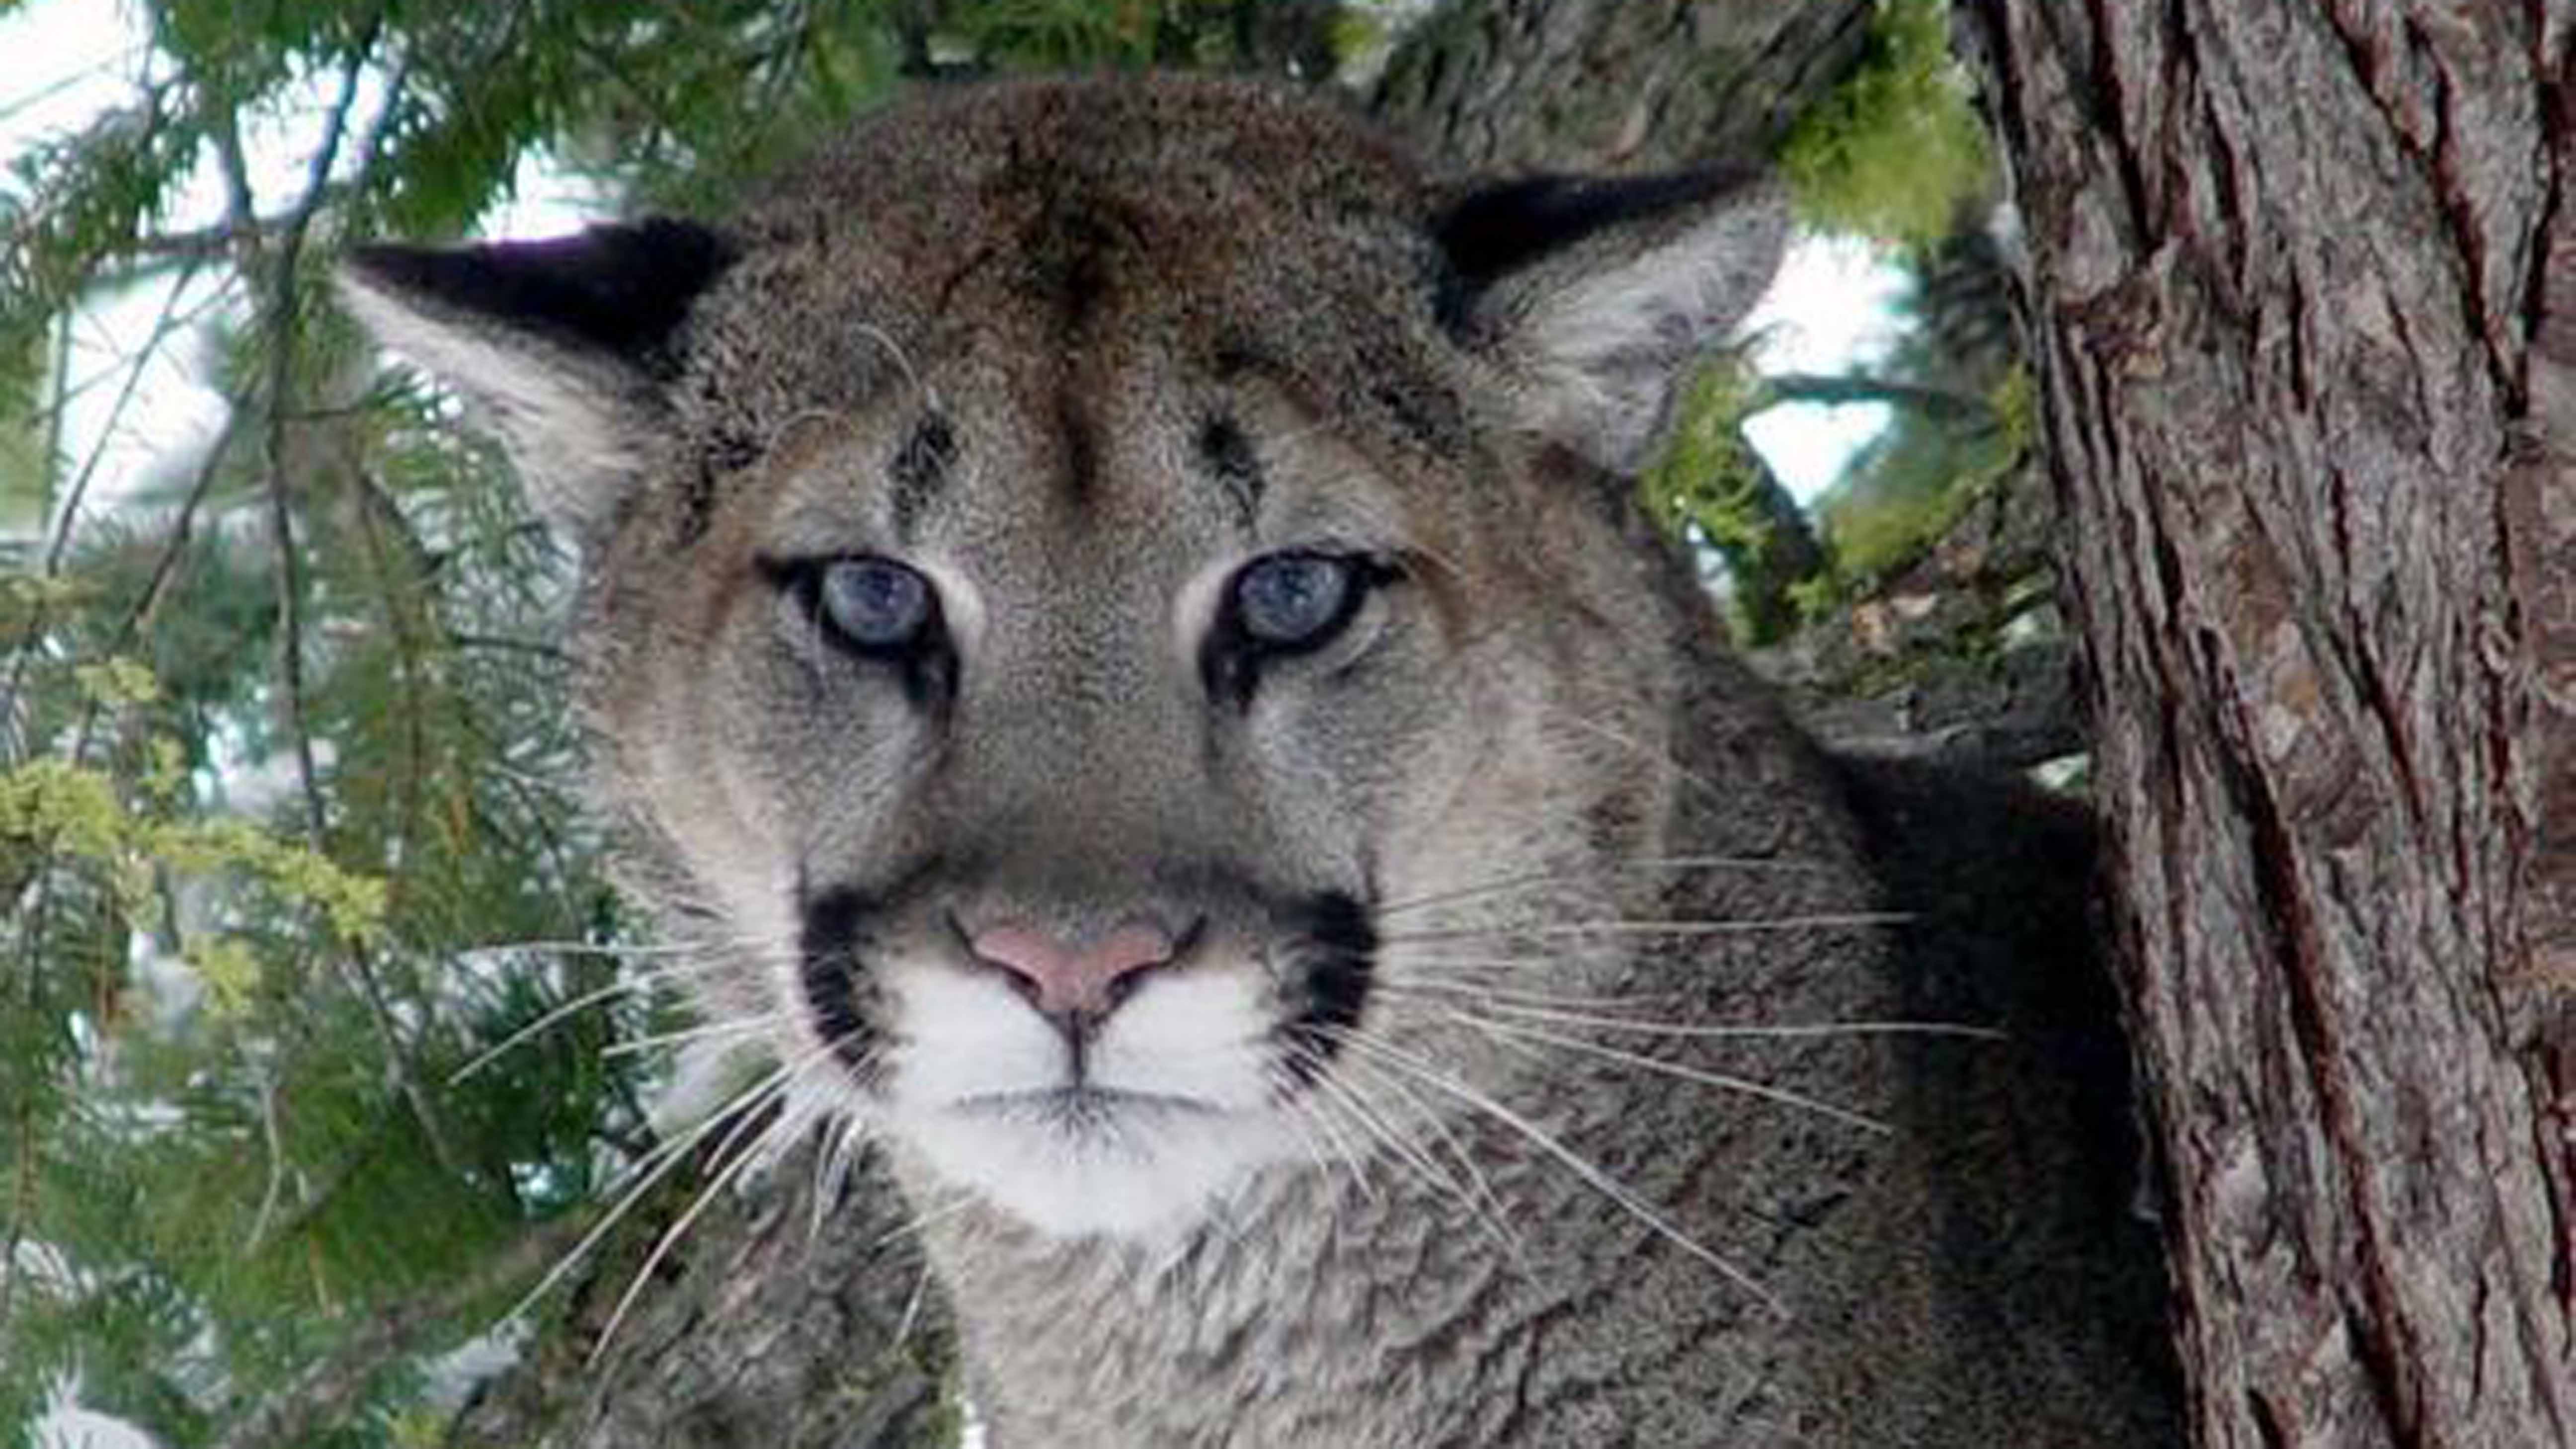 Cougars In Nw Oregon To Get Tracking Collars As Sightings Rise